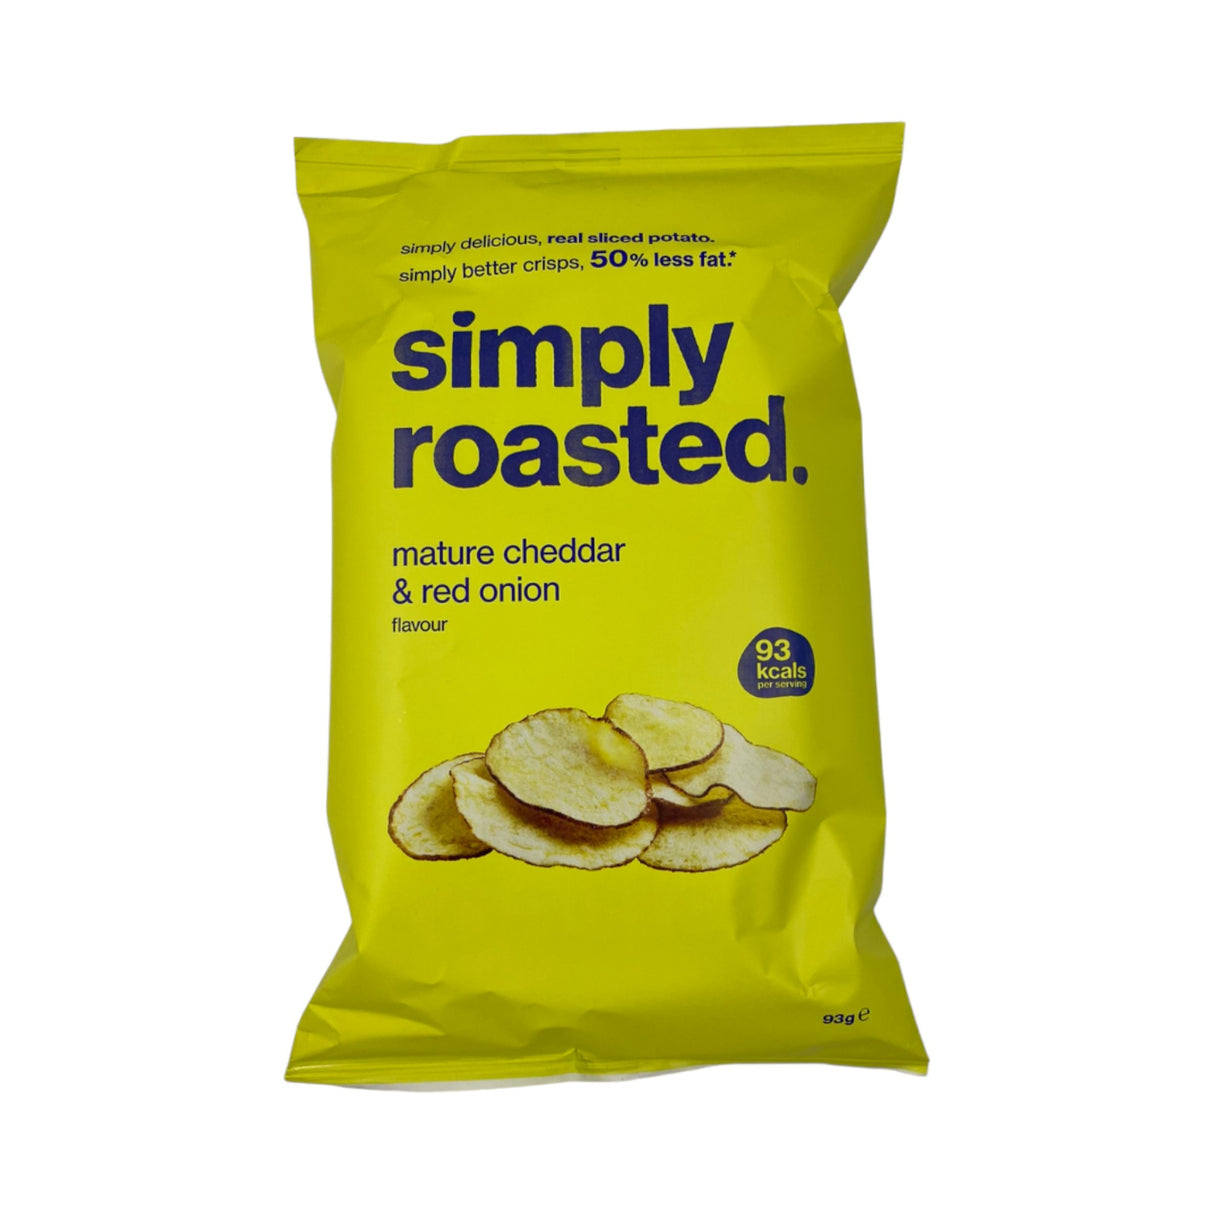 Simply Roasted - Mature Cheddar & Red Onion 93g